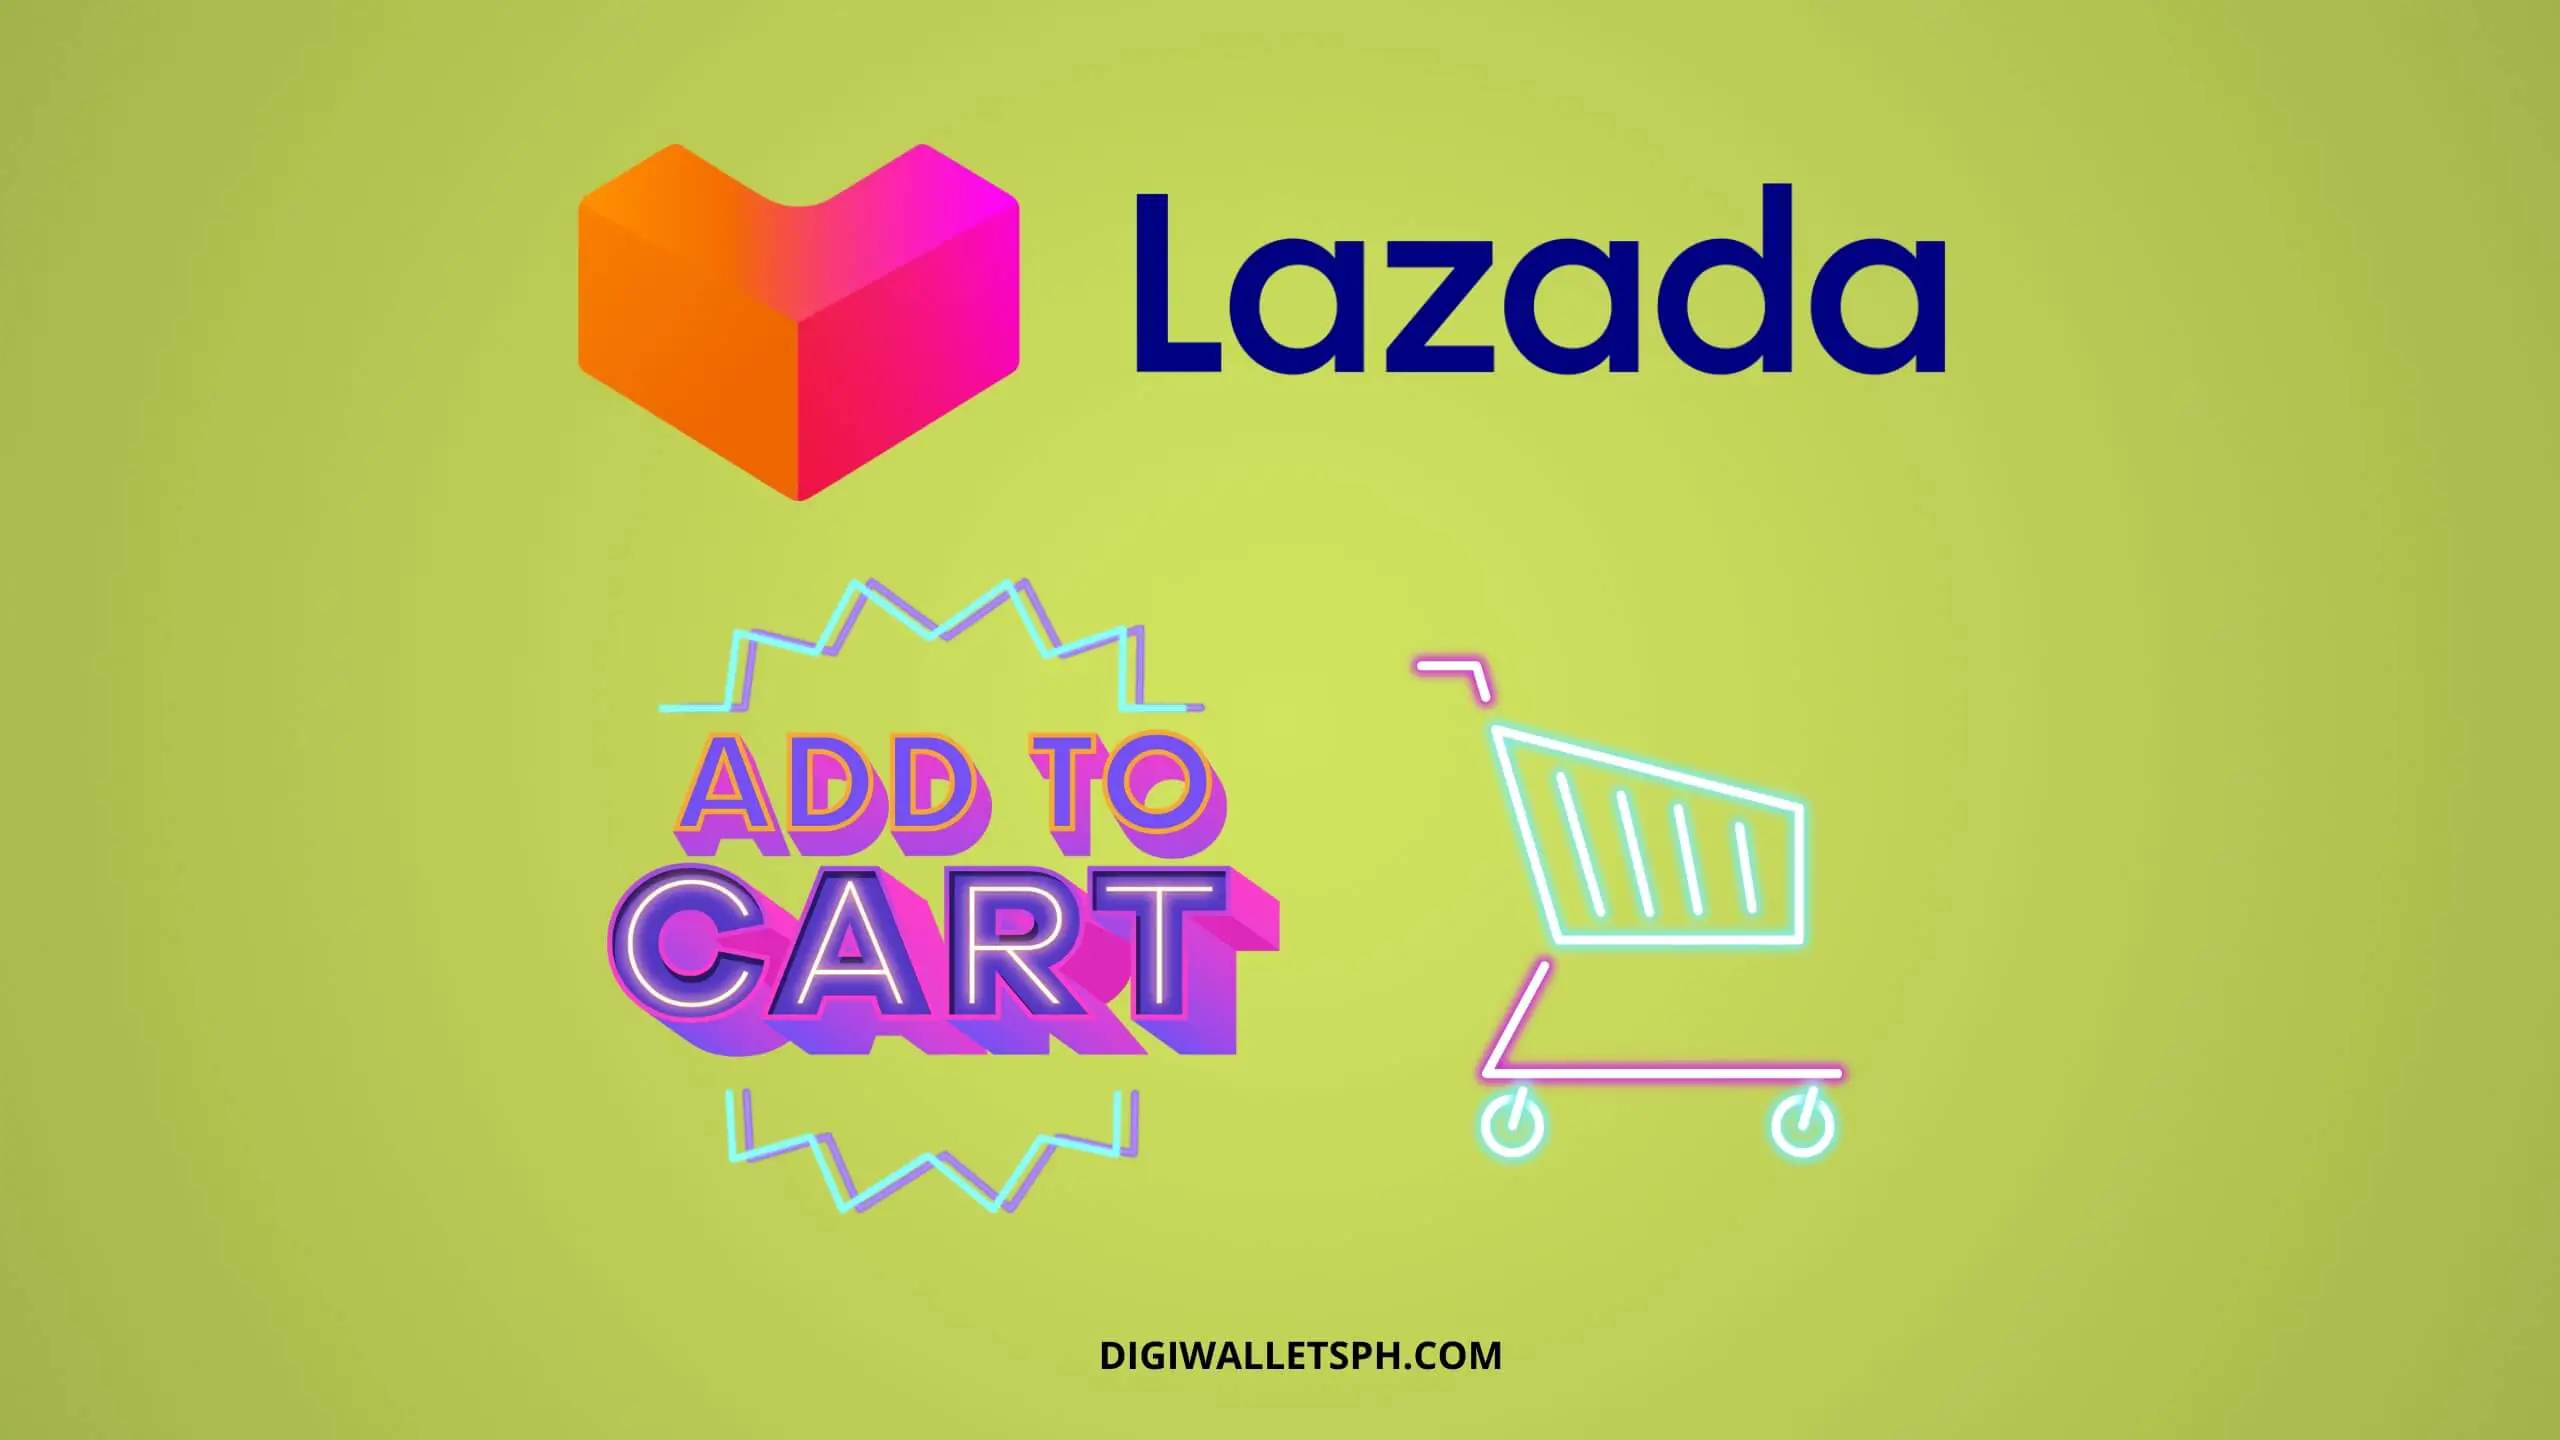 How to add to cart in Lazada